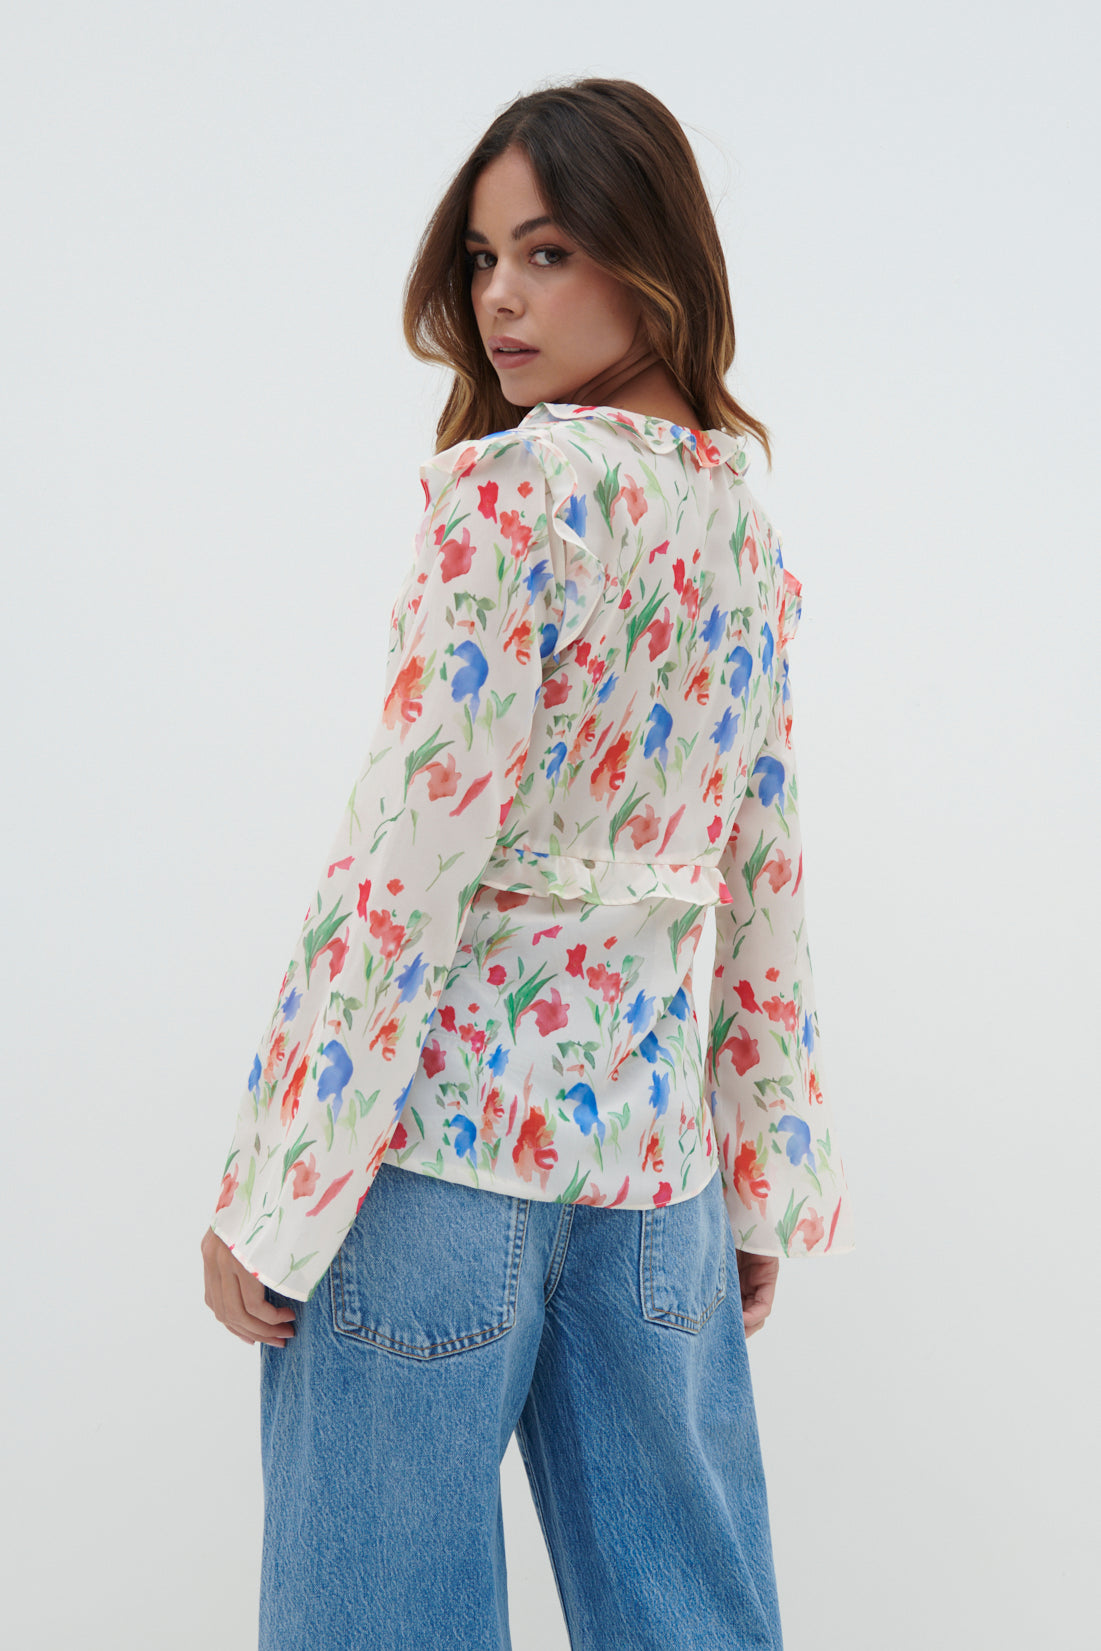 Tomlin V Neck Ruffle Tie Blouse - Dainty Floral